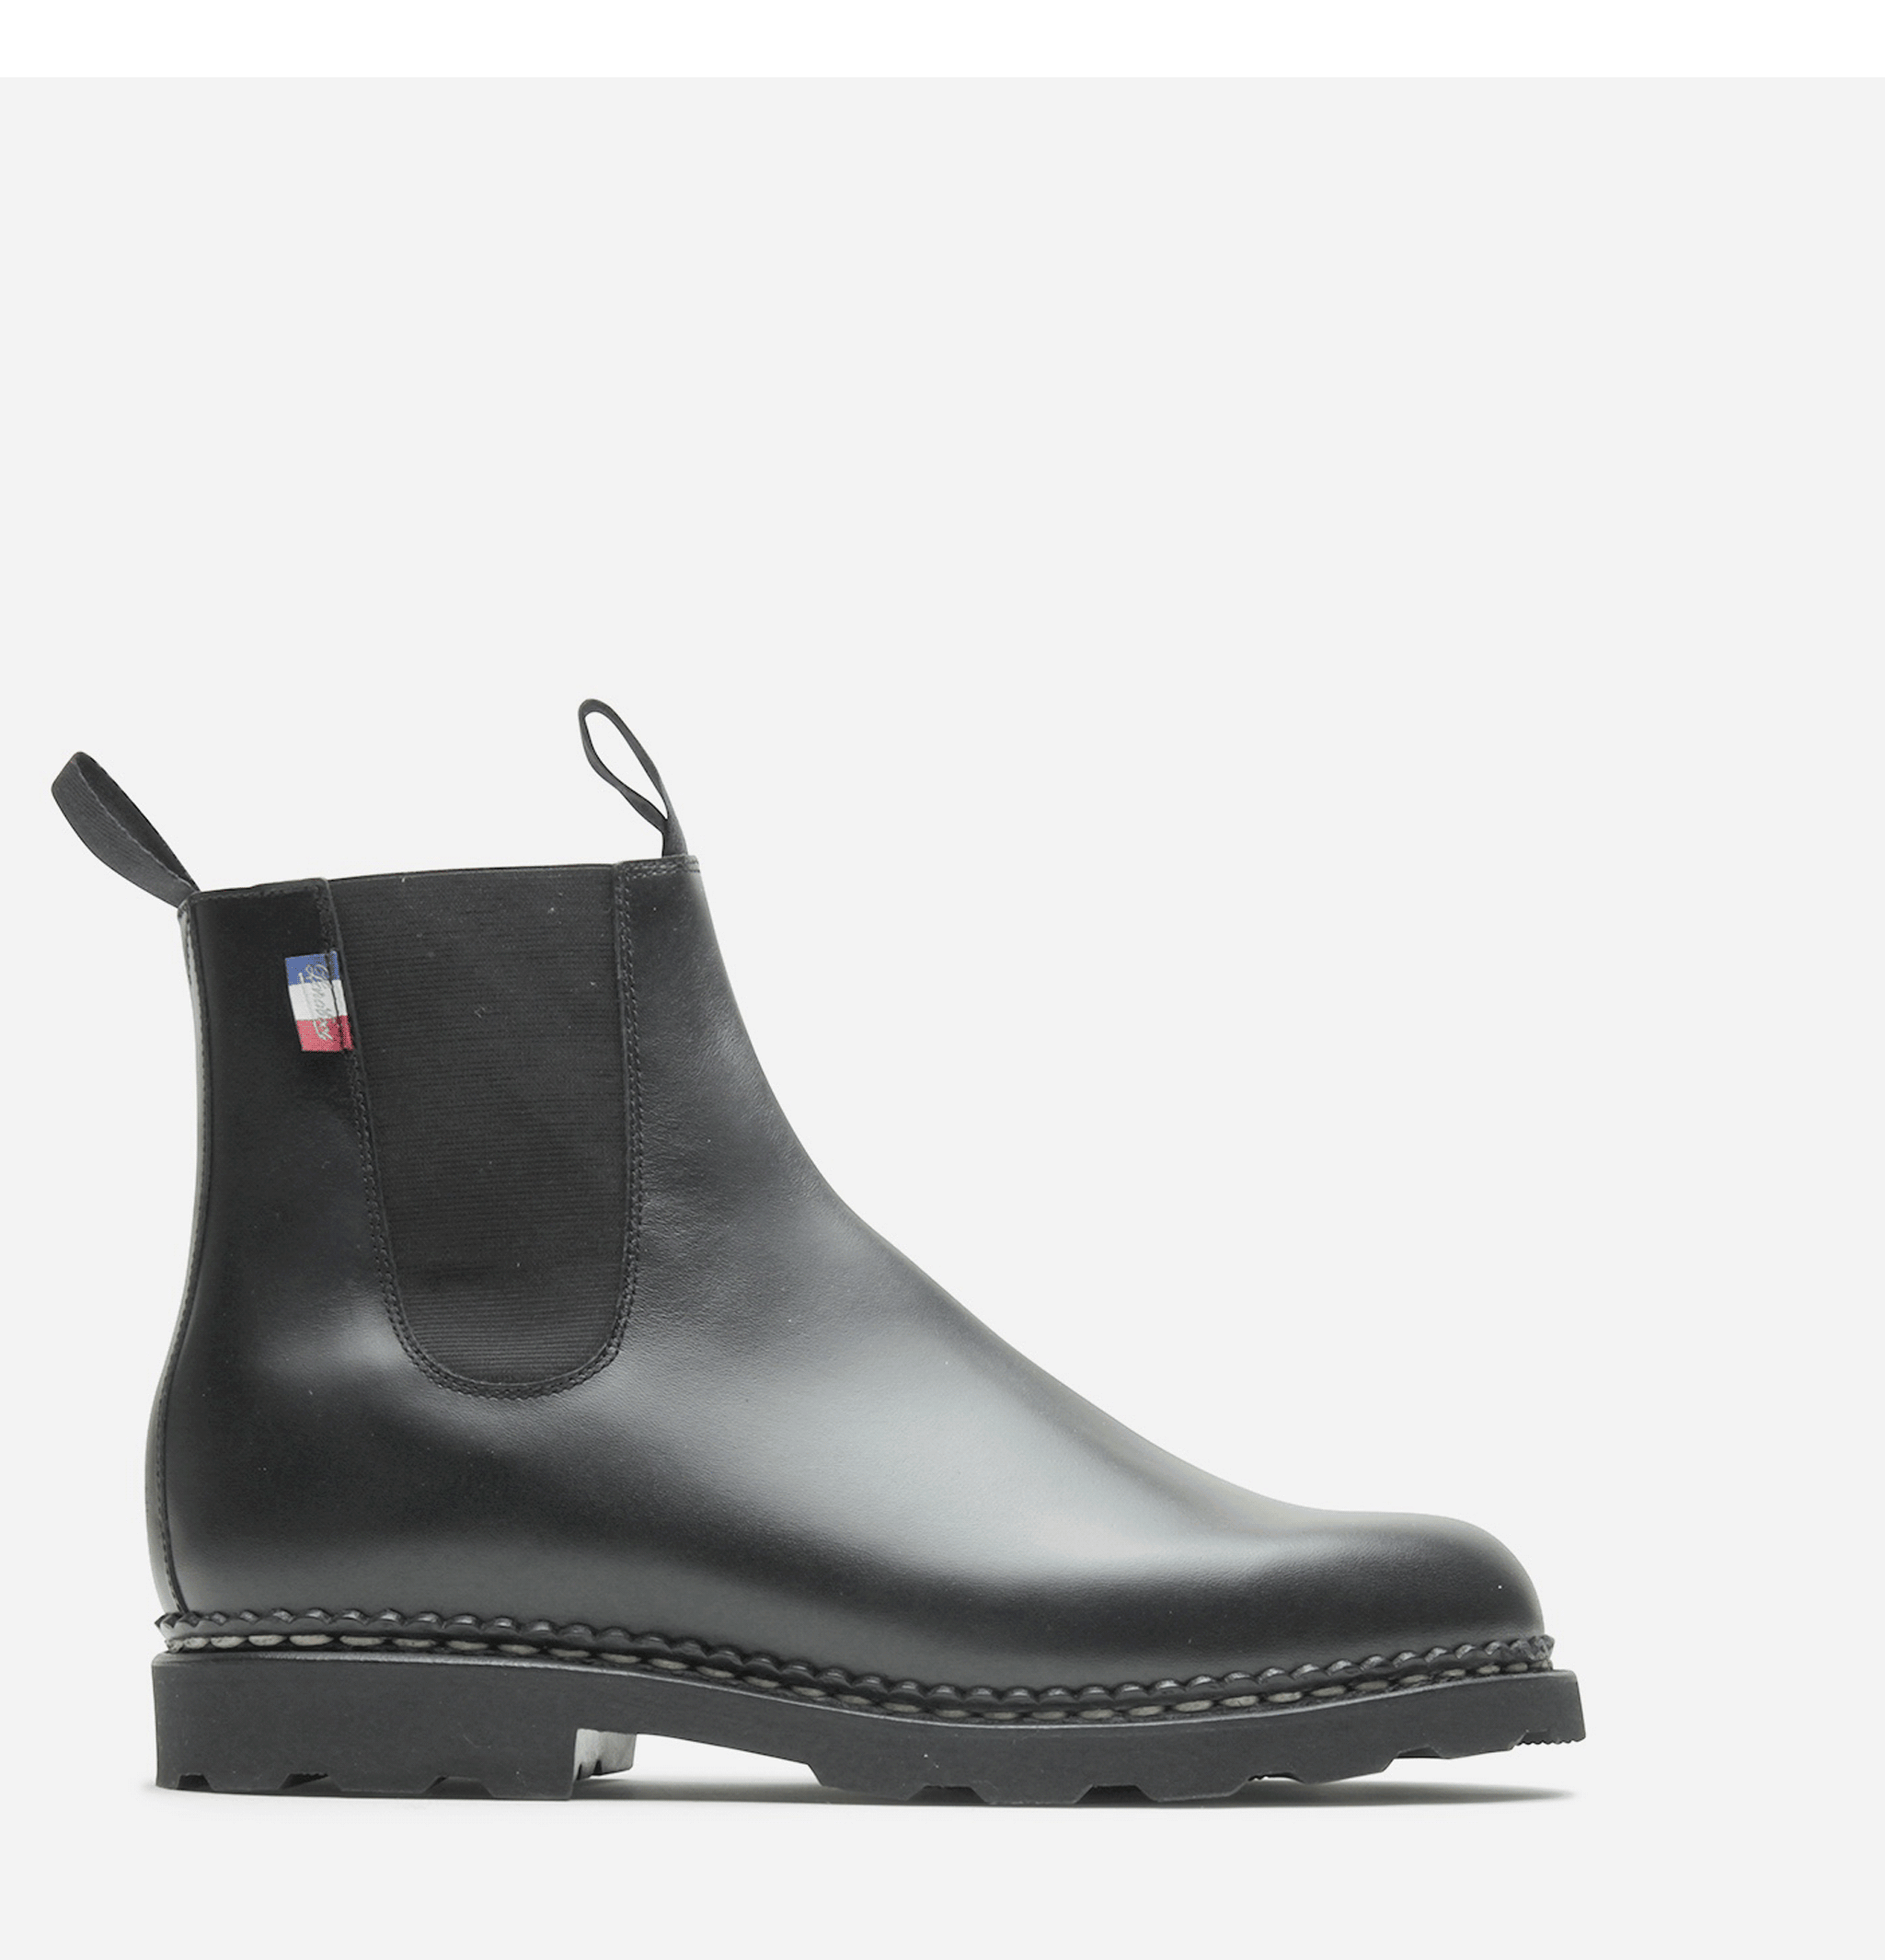 Paraboot Elevage Boots Black